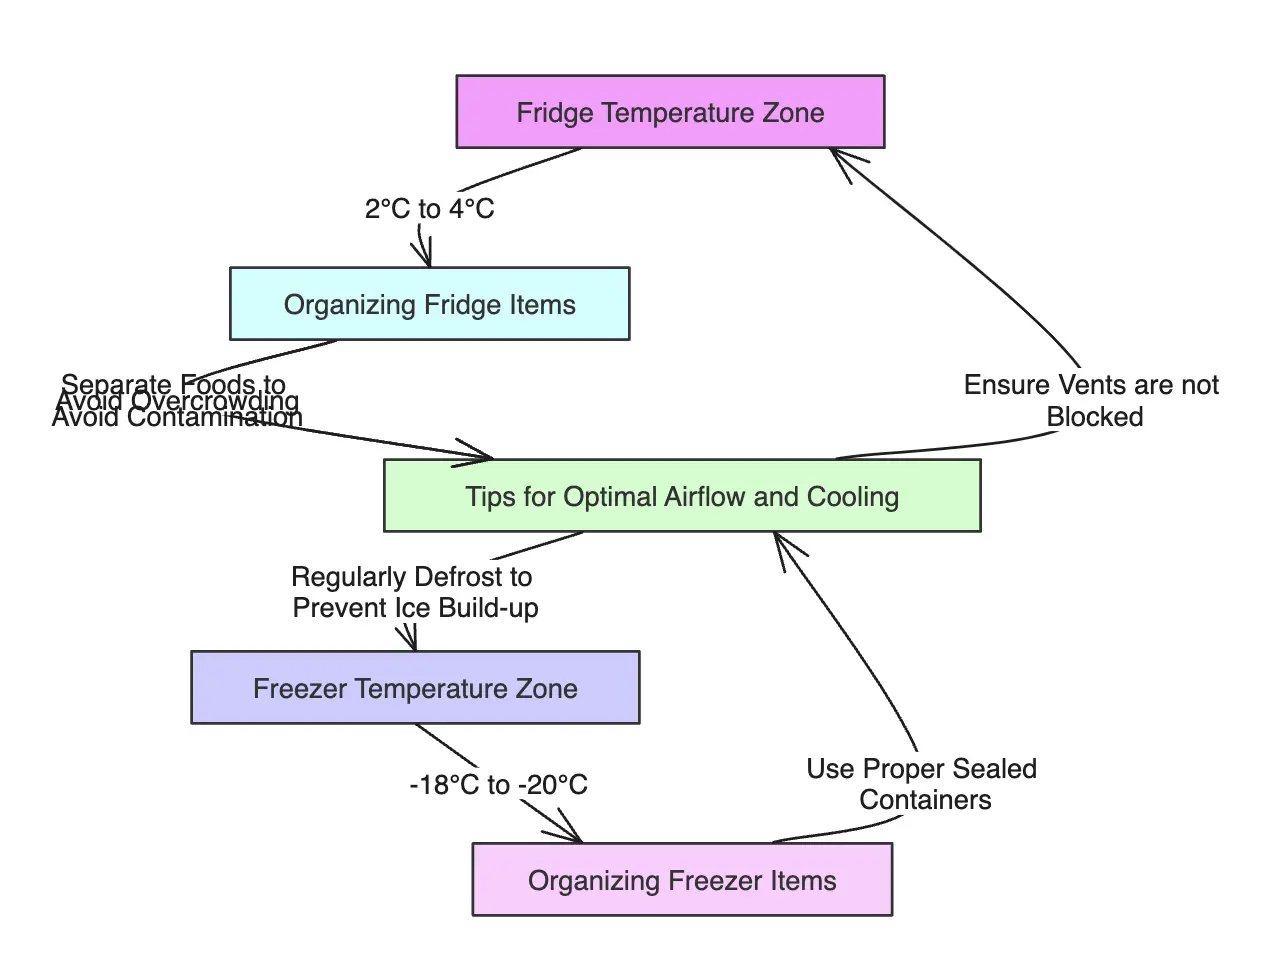 image of mindmap which show Fridge Temperature